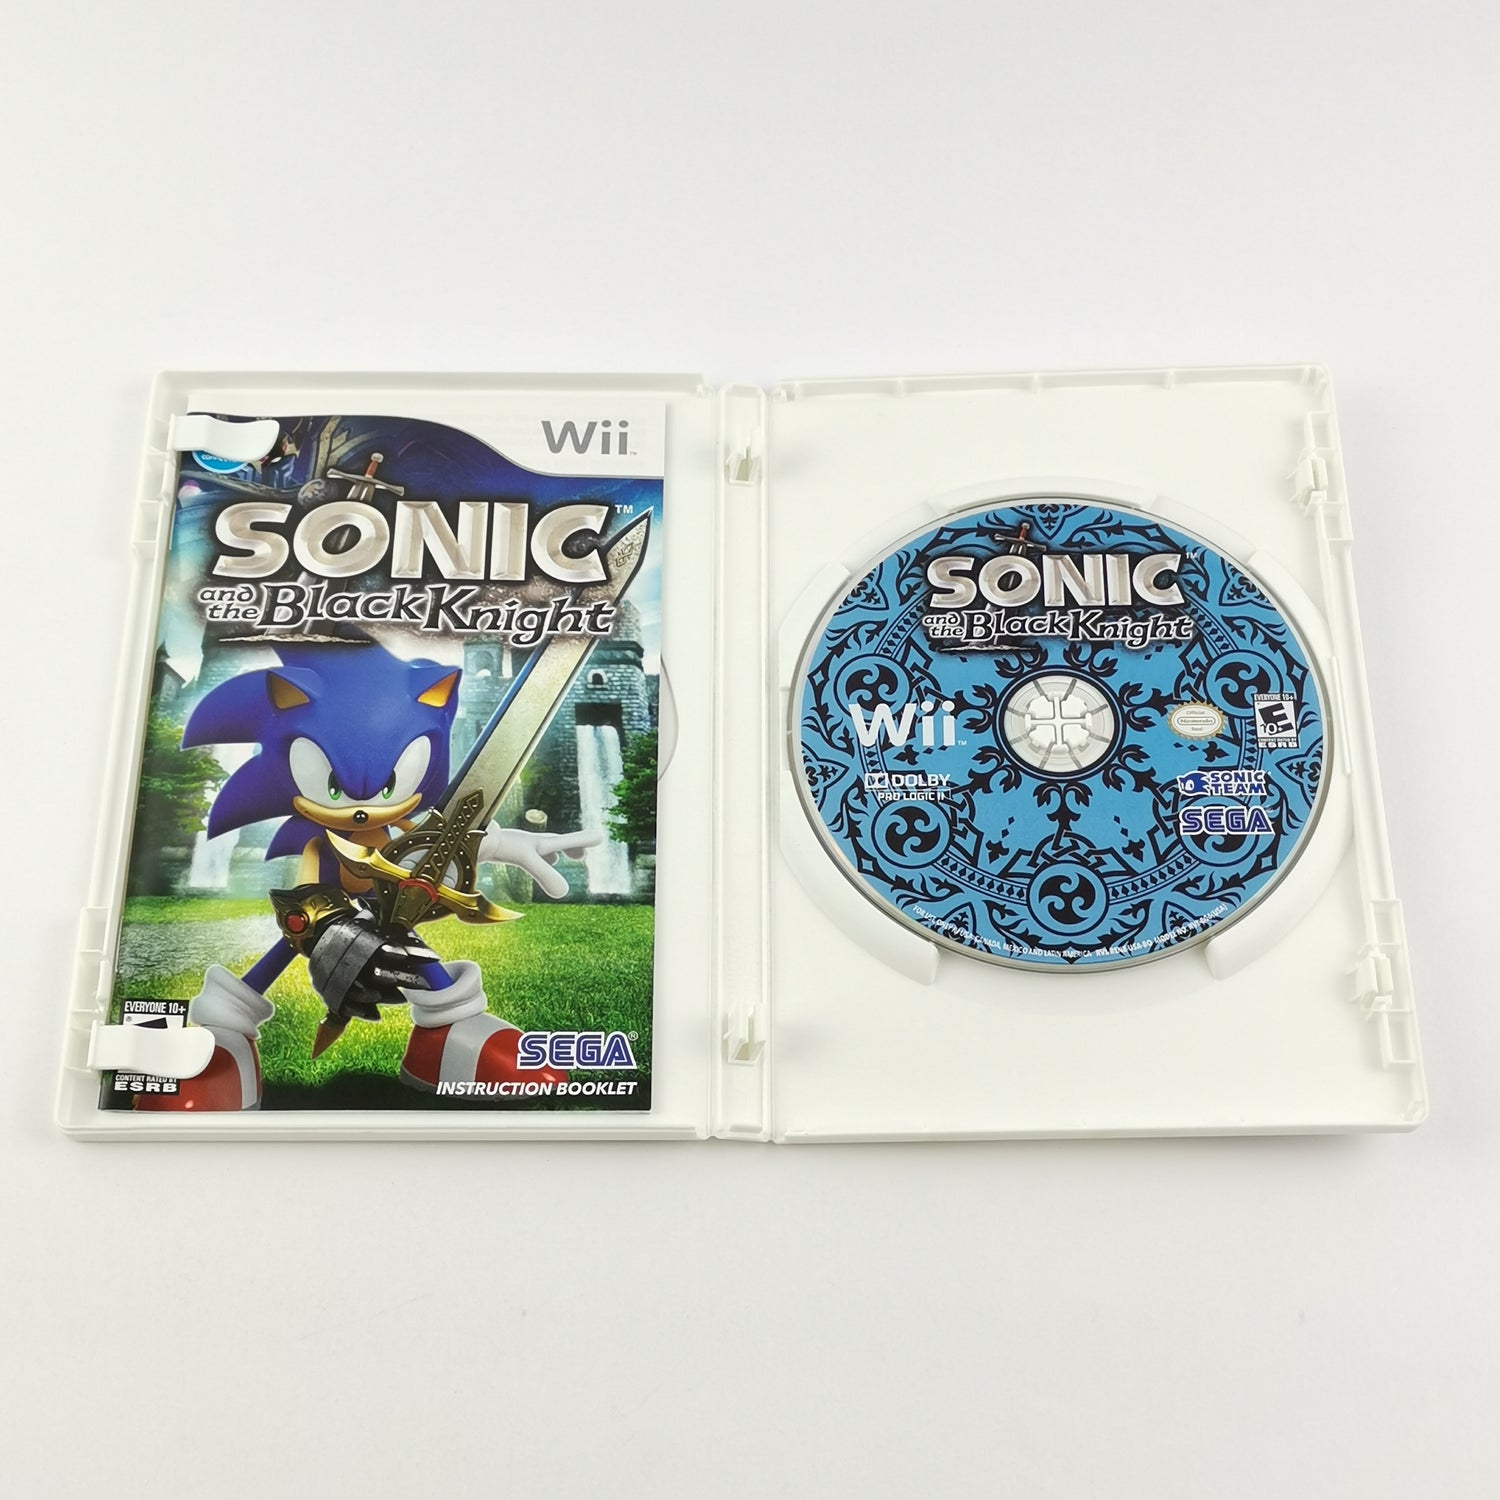 Nintendo Wii Spiel : Sonic and the Black Knight - OVP & Anleitung NTSC USA Wii U